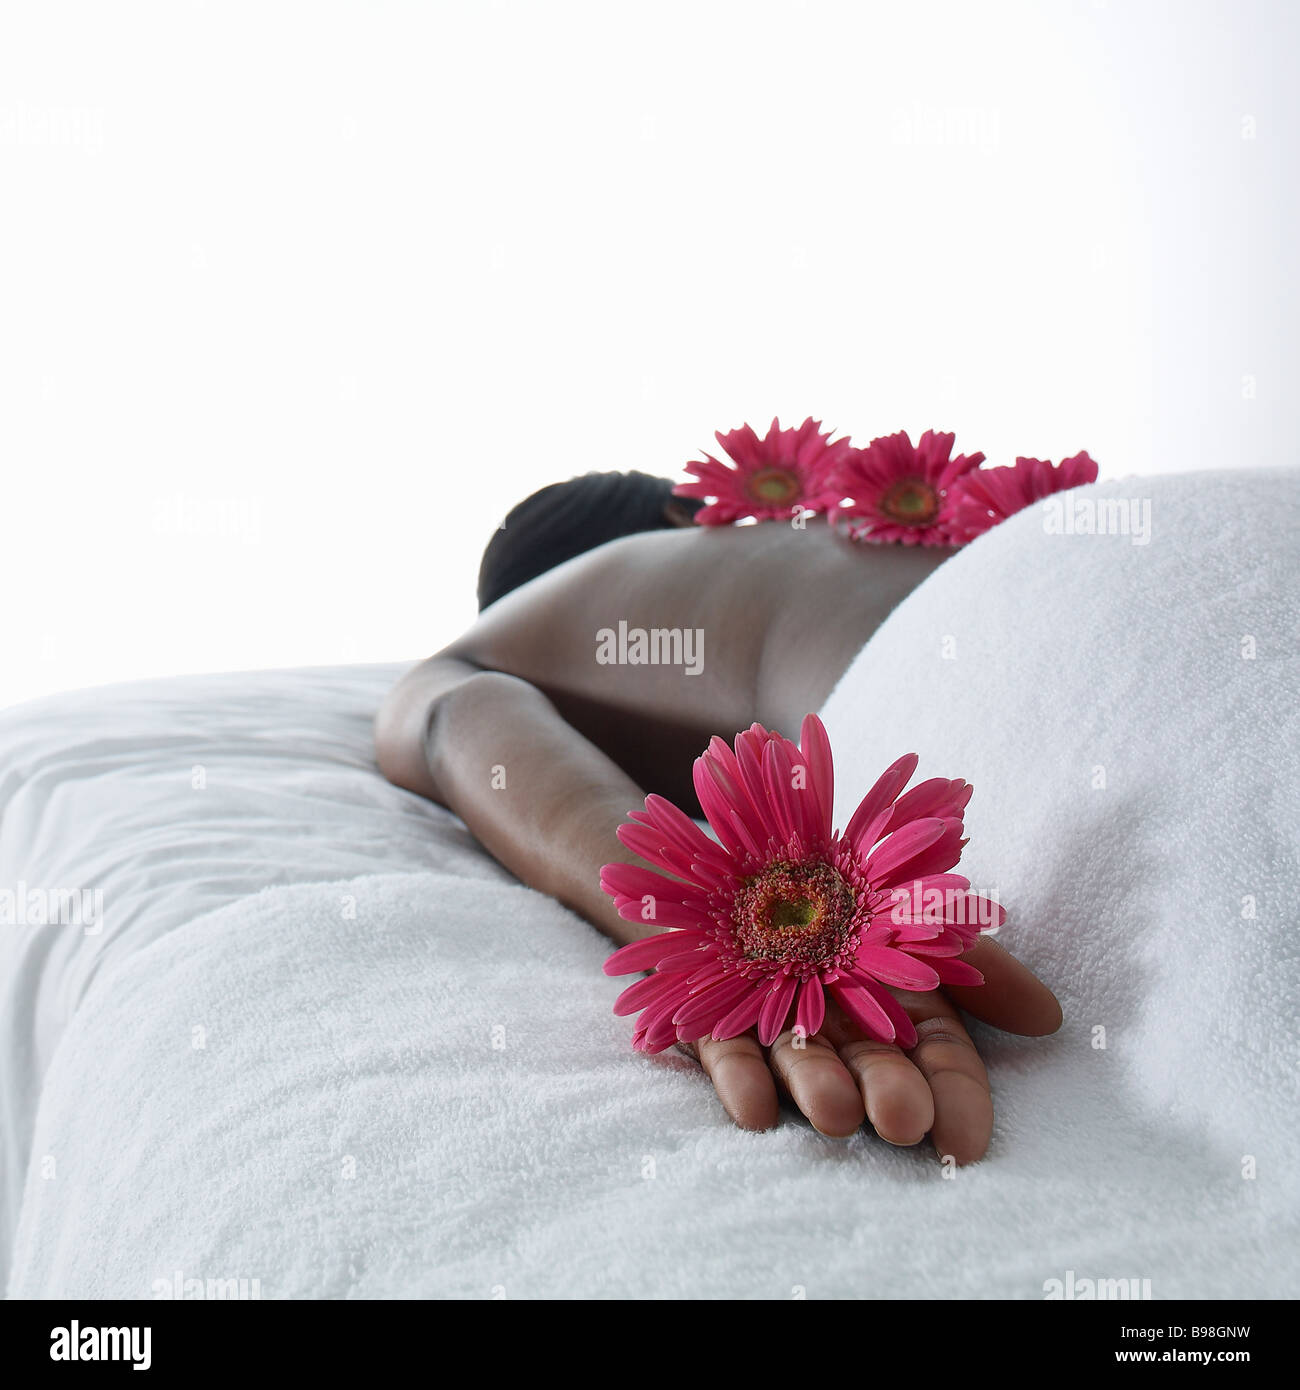 Black women laying on massage tables with flower Stock Photo